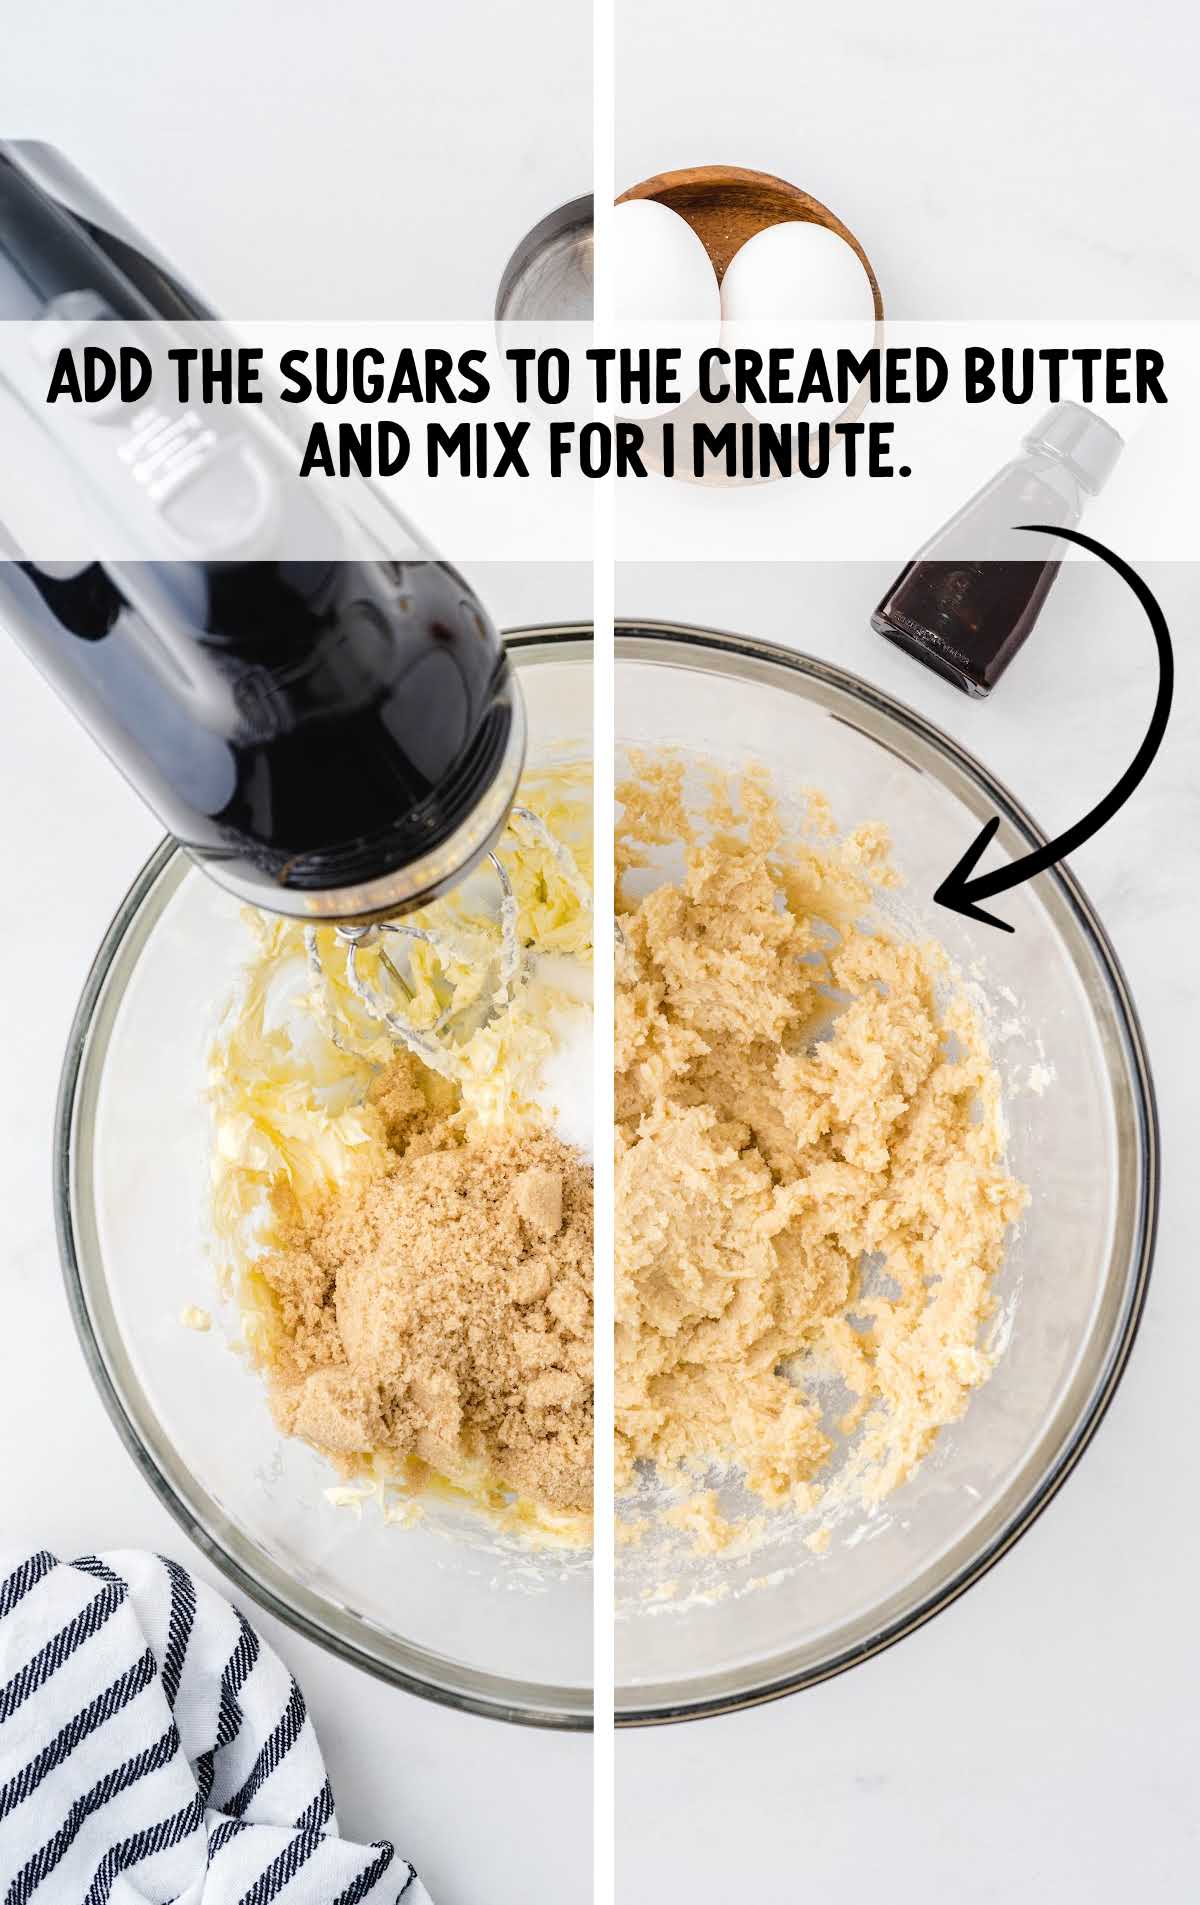 sugar added to the cream butter and blended together in a bowl